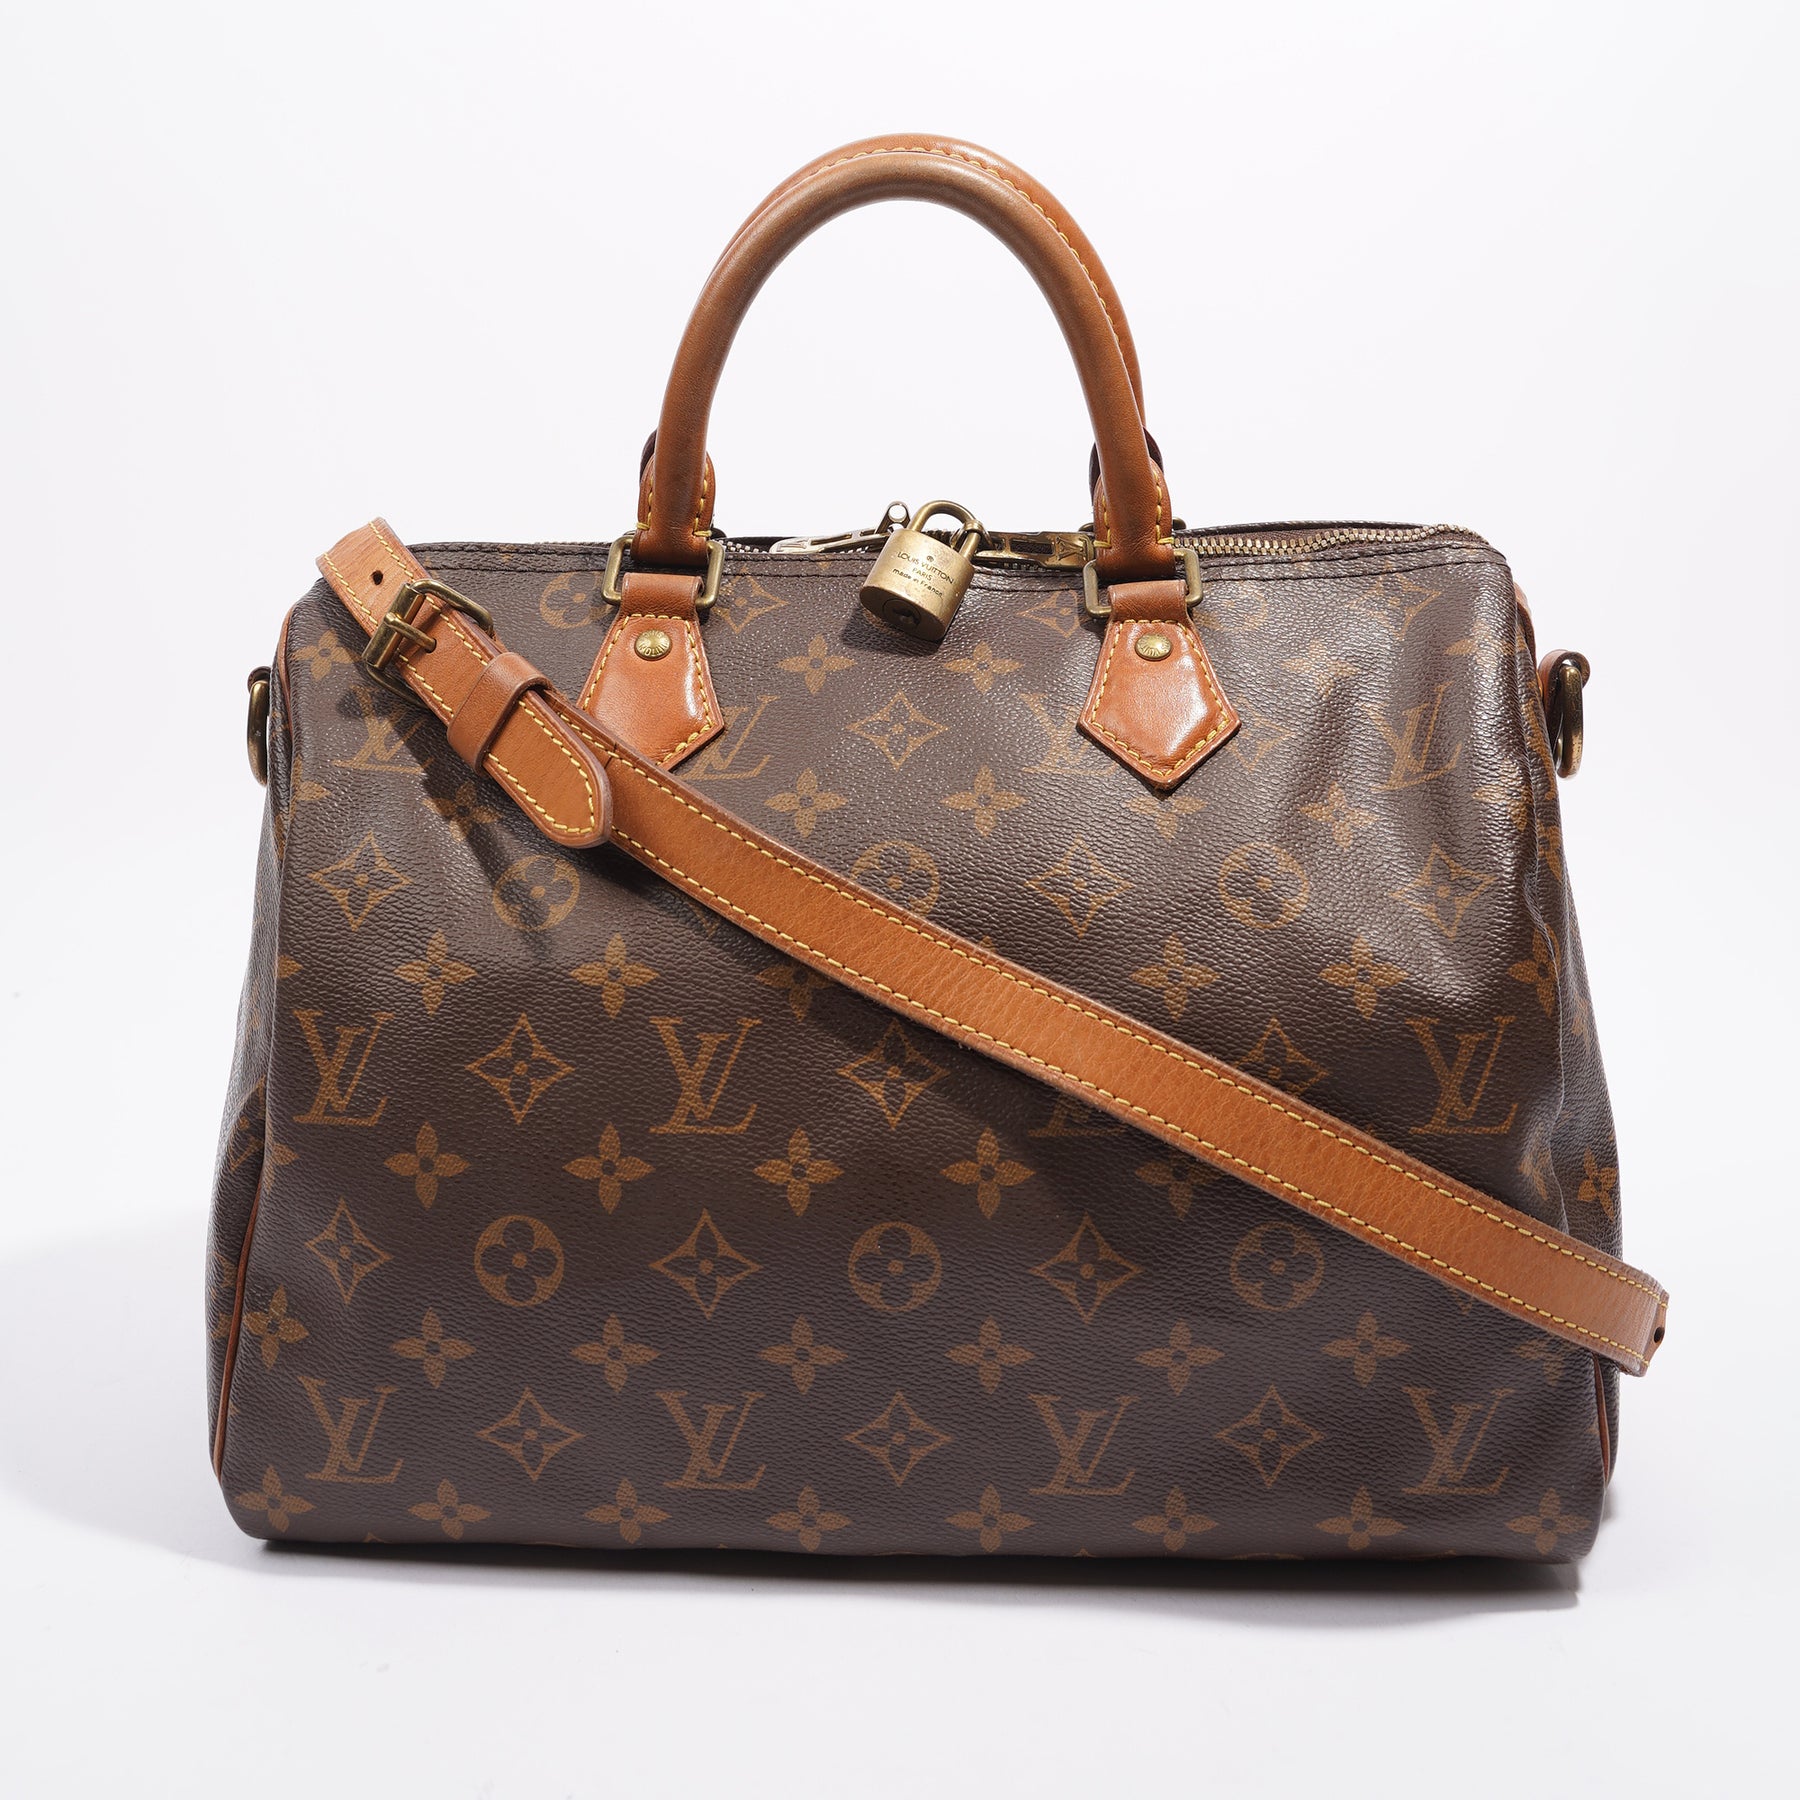 LV Speedy Bandouliere 20 in Monogram Canvas and Black Patterned Strap –  Brands Lover